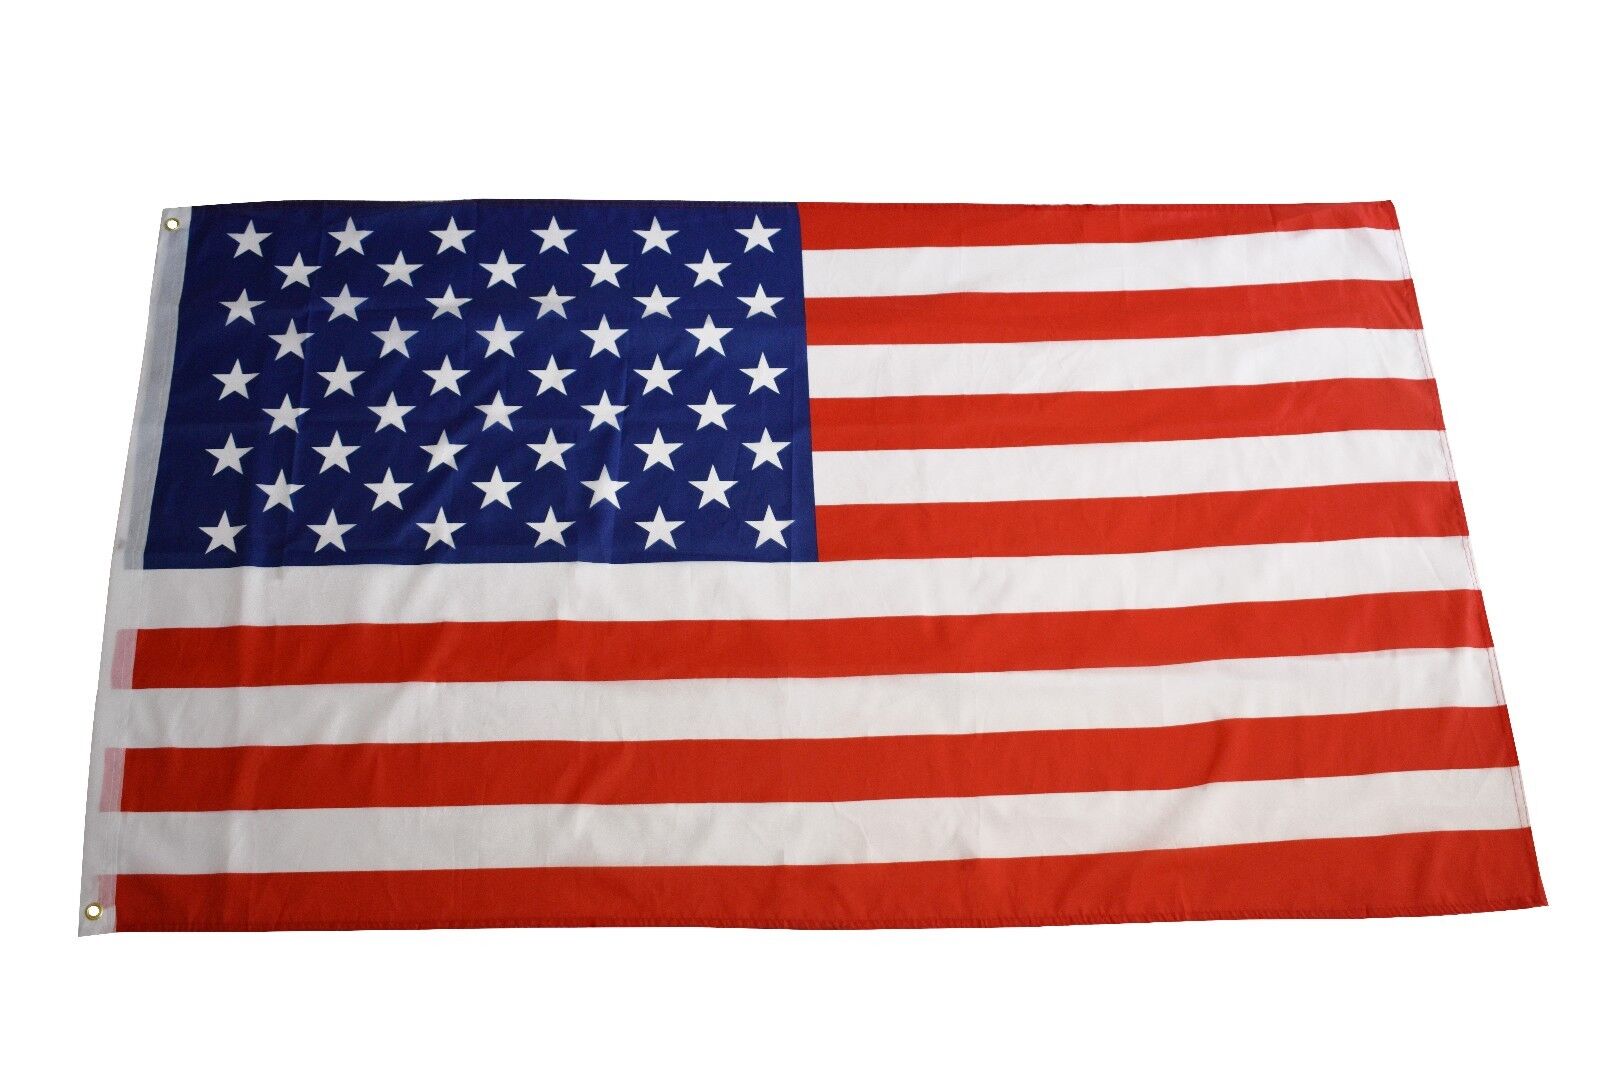 NEW American Flag All-Weather Outdoor Polyester Show USA Patriotic Support 3'X5'